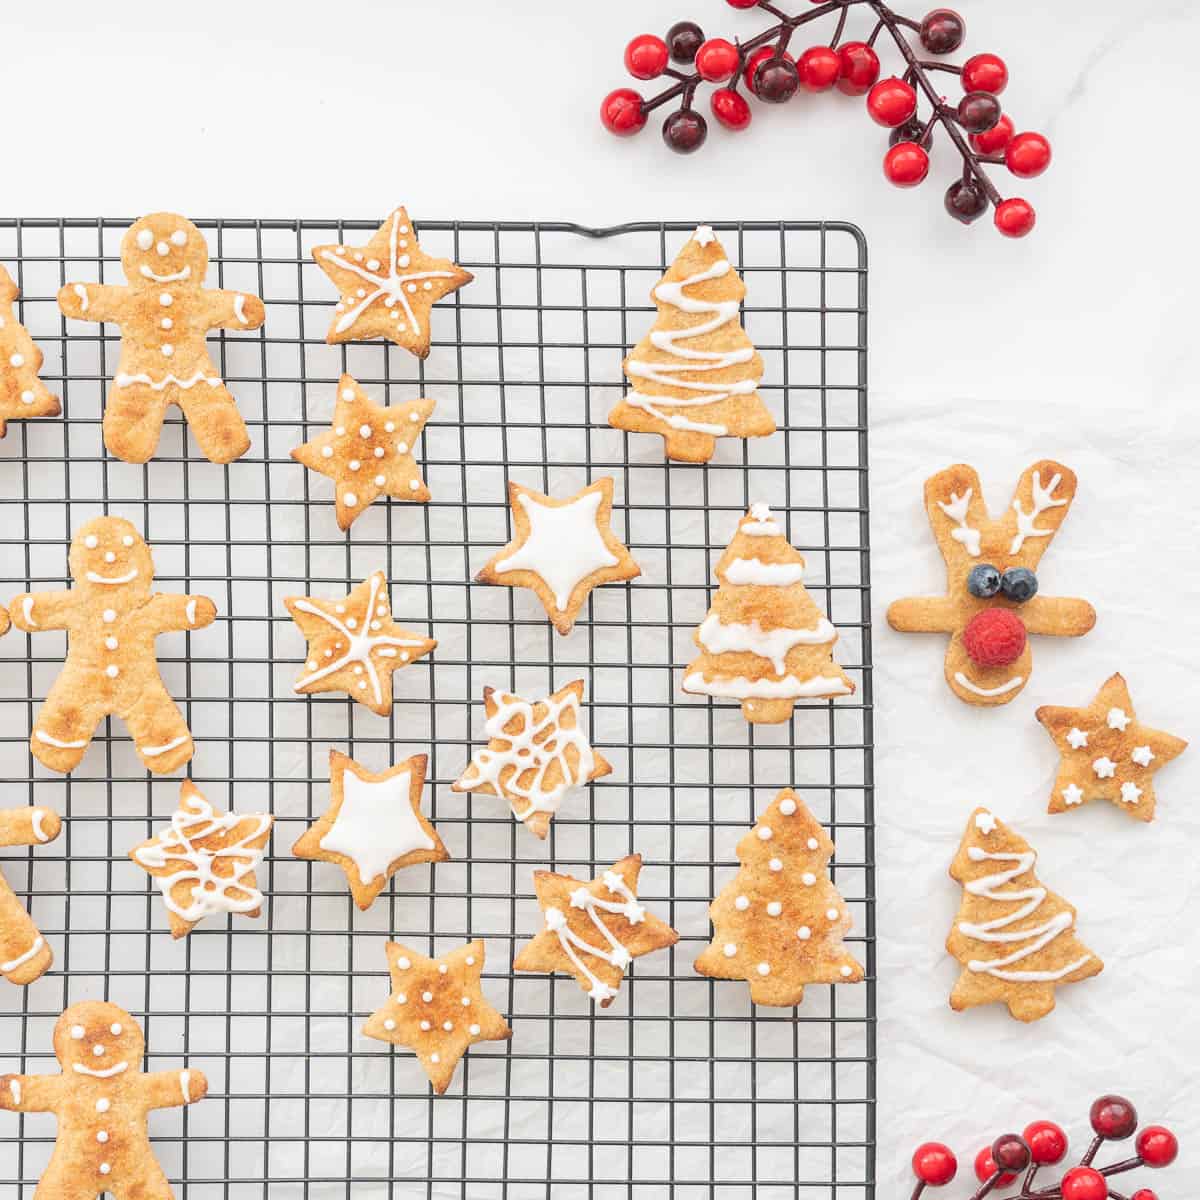 A collection of christmas shaped cookies decorated with white icing on a black cooling racks. gingerbread men, christmas trees, reindeer and stars. 